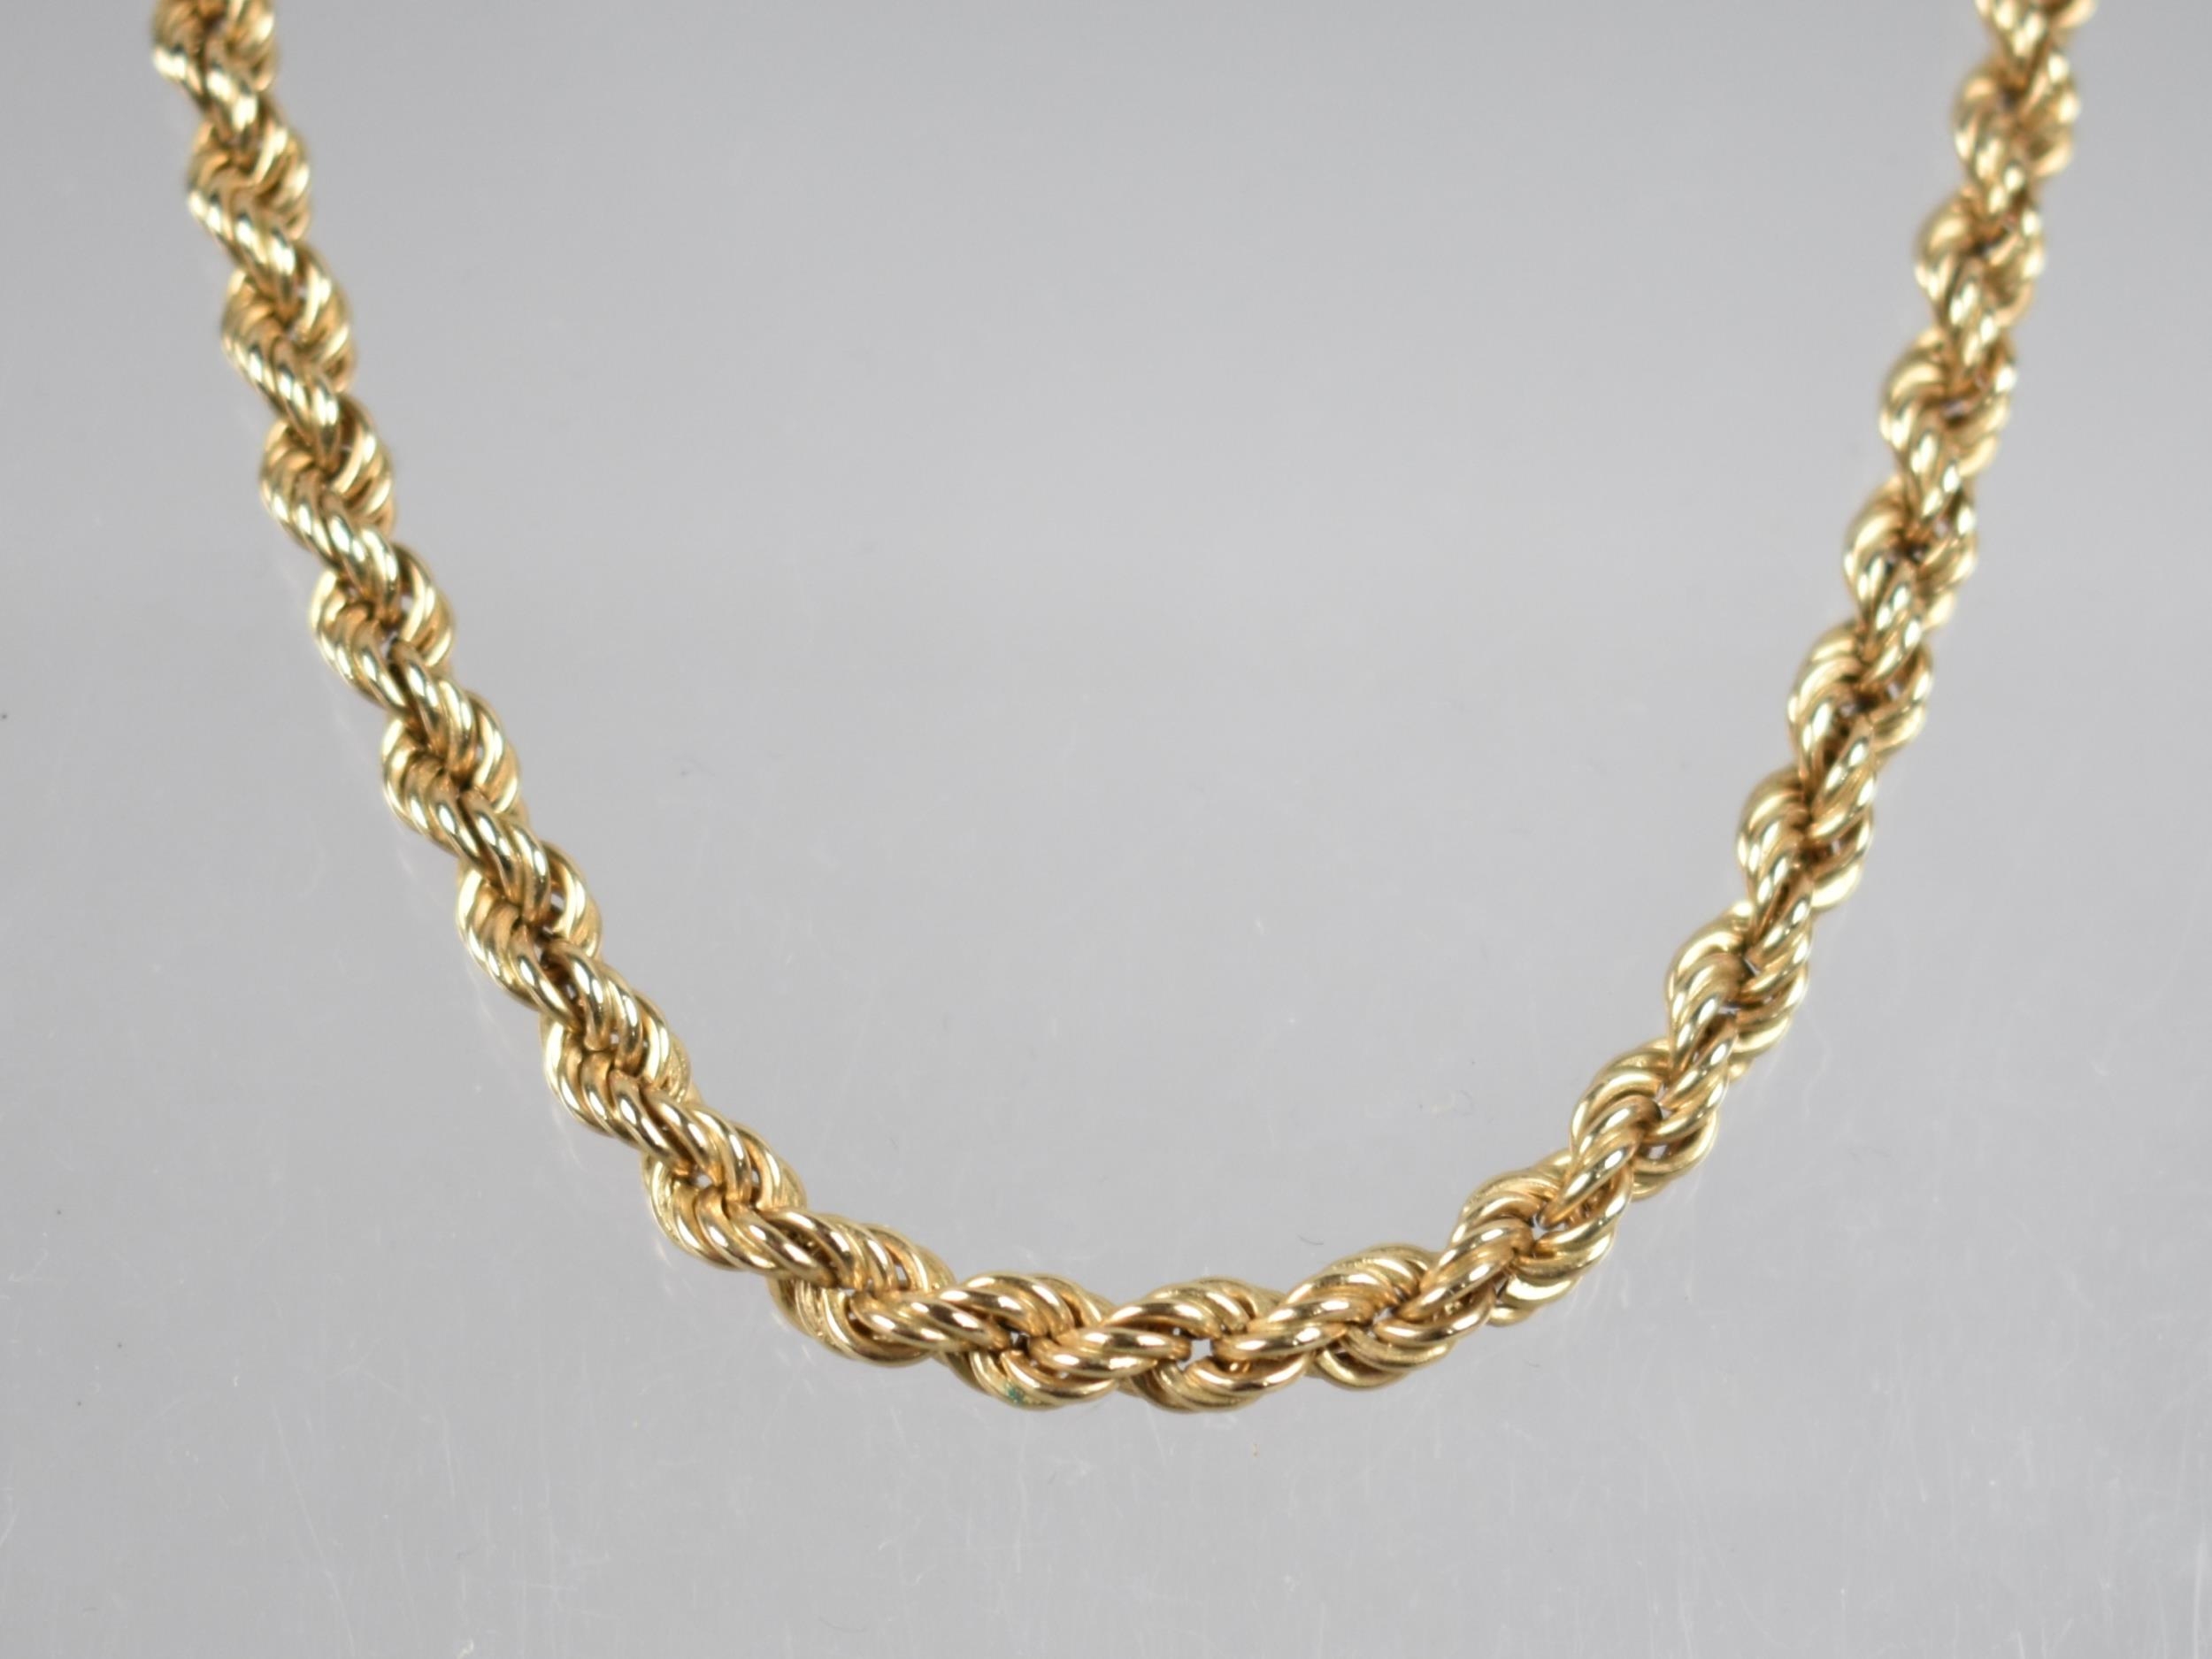 A 9ct Gold Rope Twist Necklace, 39cms Long, Stamped 9ct to Spring Barrel Clasp, 4.8gms - Image 3 of 3